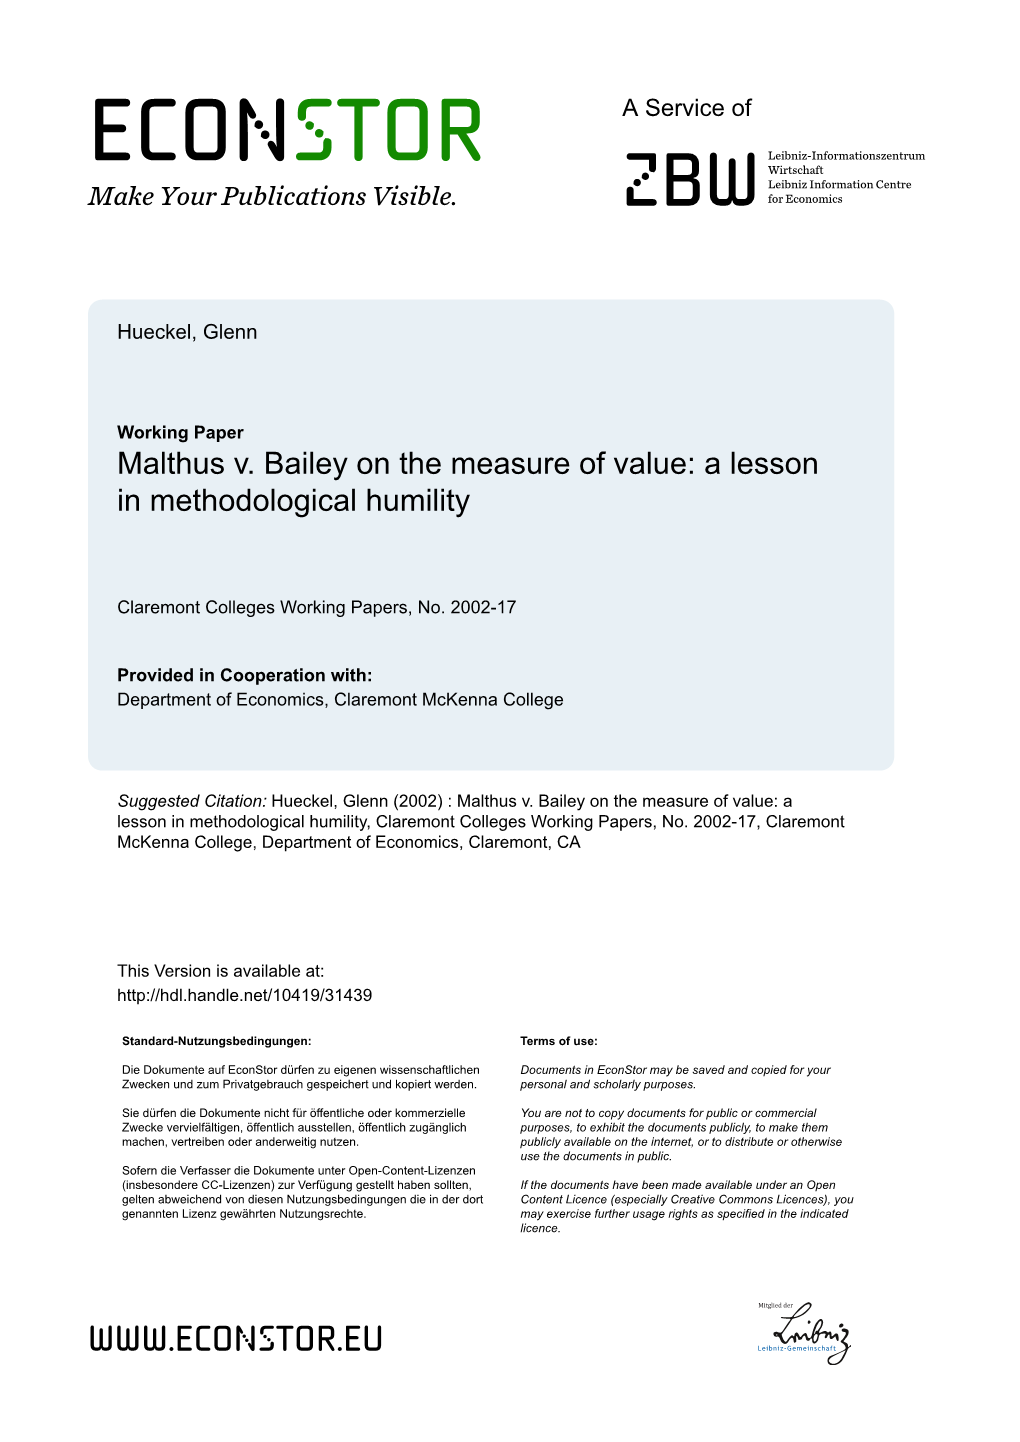 Malthus V. Bailey on the Measure of Value: a Lesson in Methodological Humility